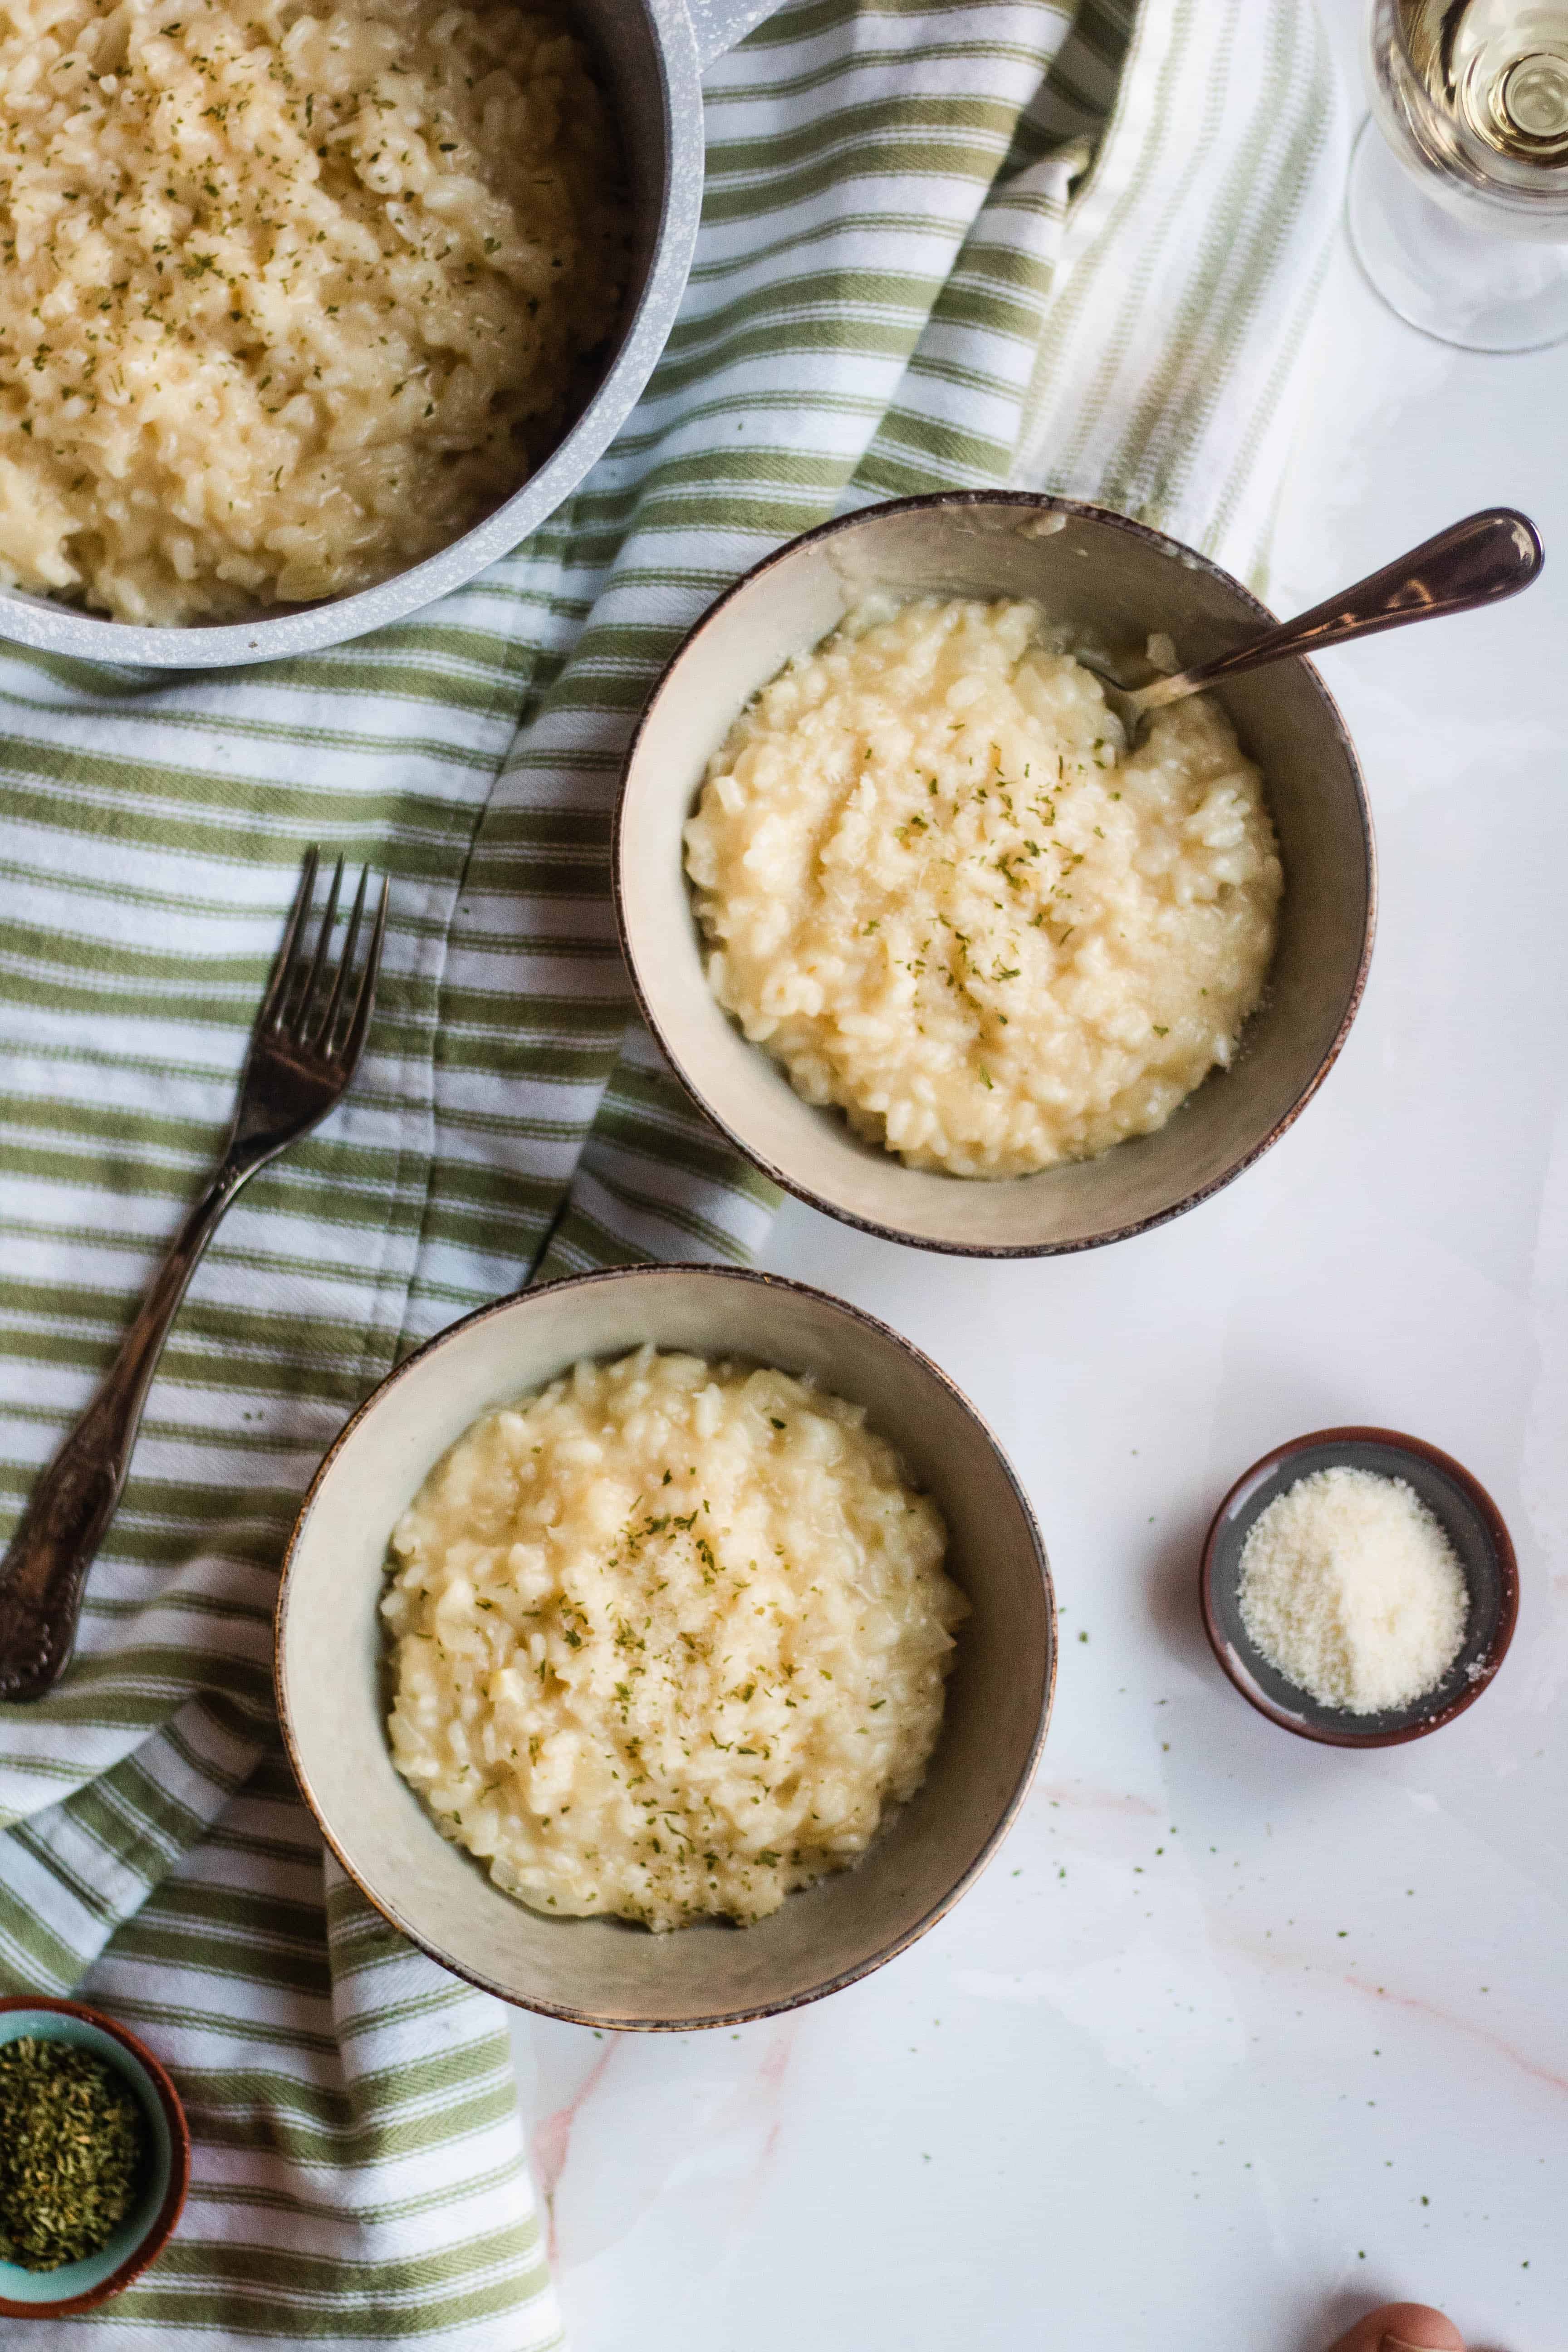 Two bowls of Parmesan risotto with a small bowl of parmesan cheese next to them.